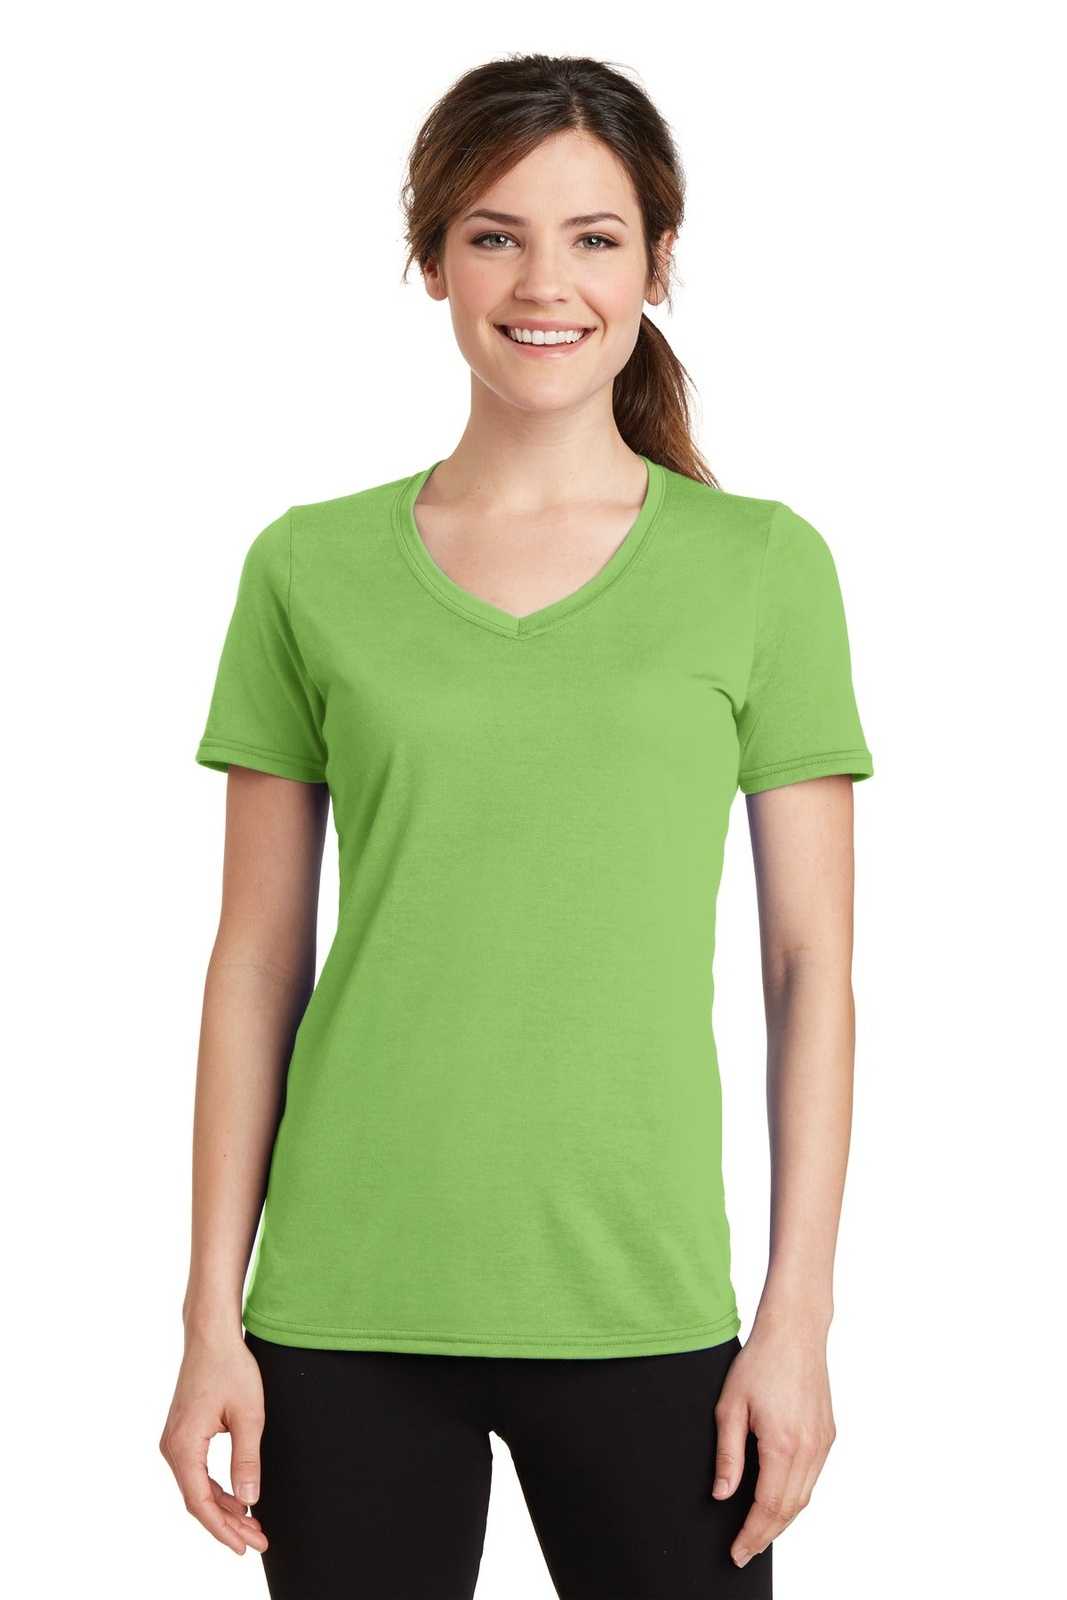 Port & Company LPC381V Ladies Performance Blend V-Neck Tee - Lime - HIT a Double - 1